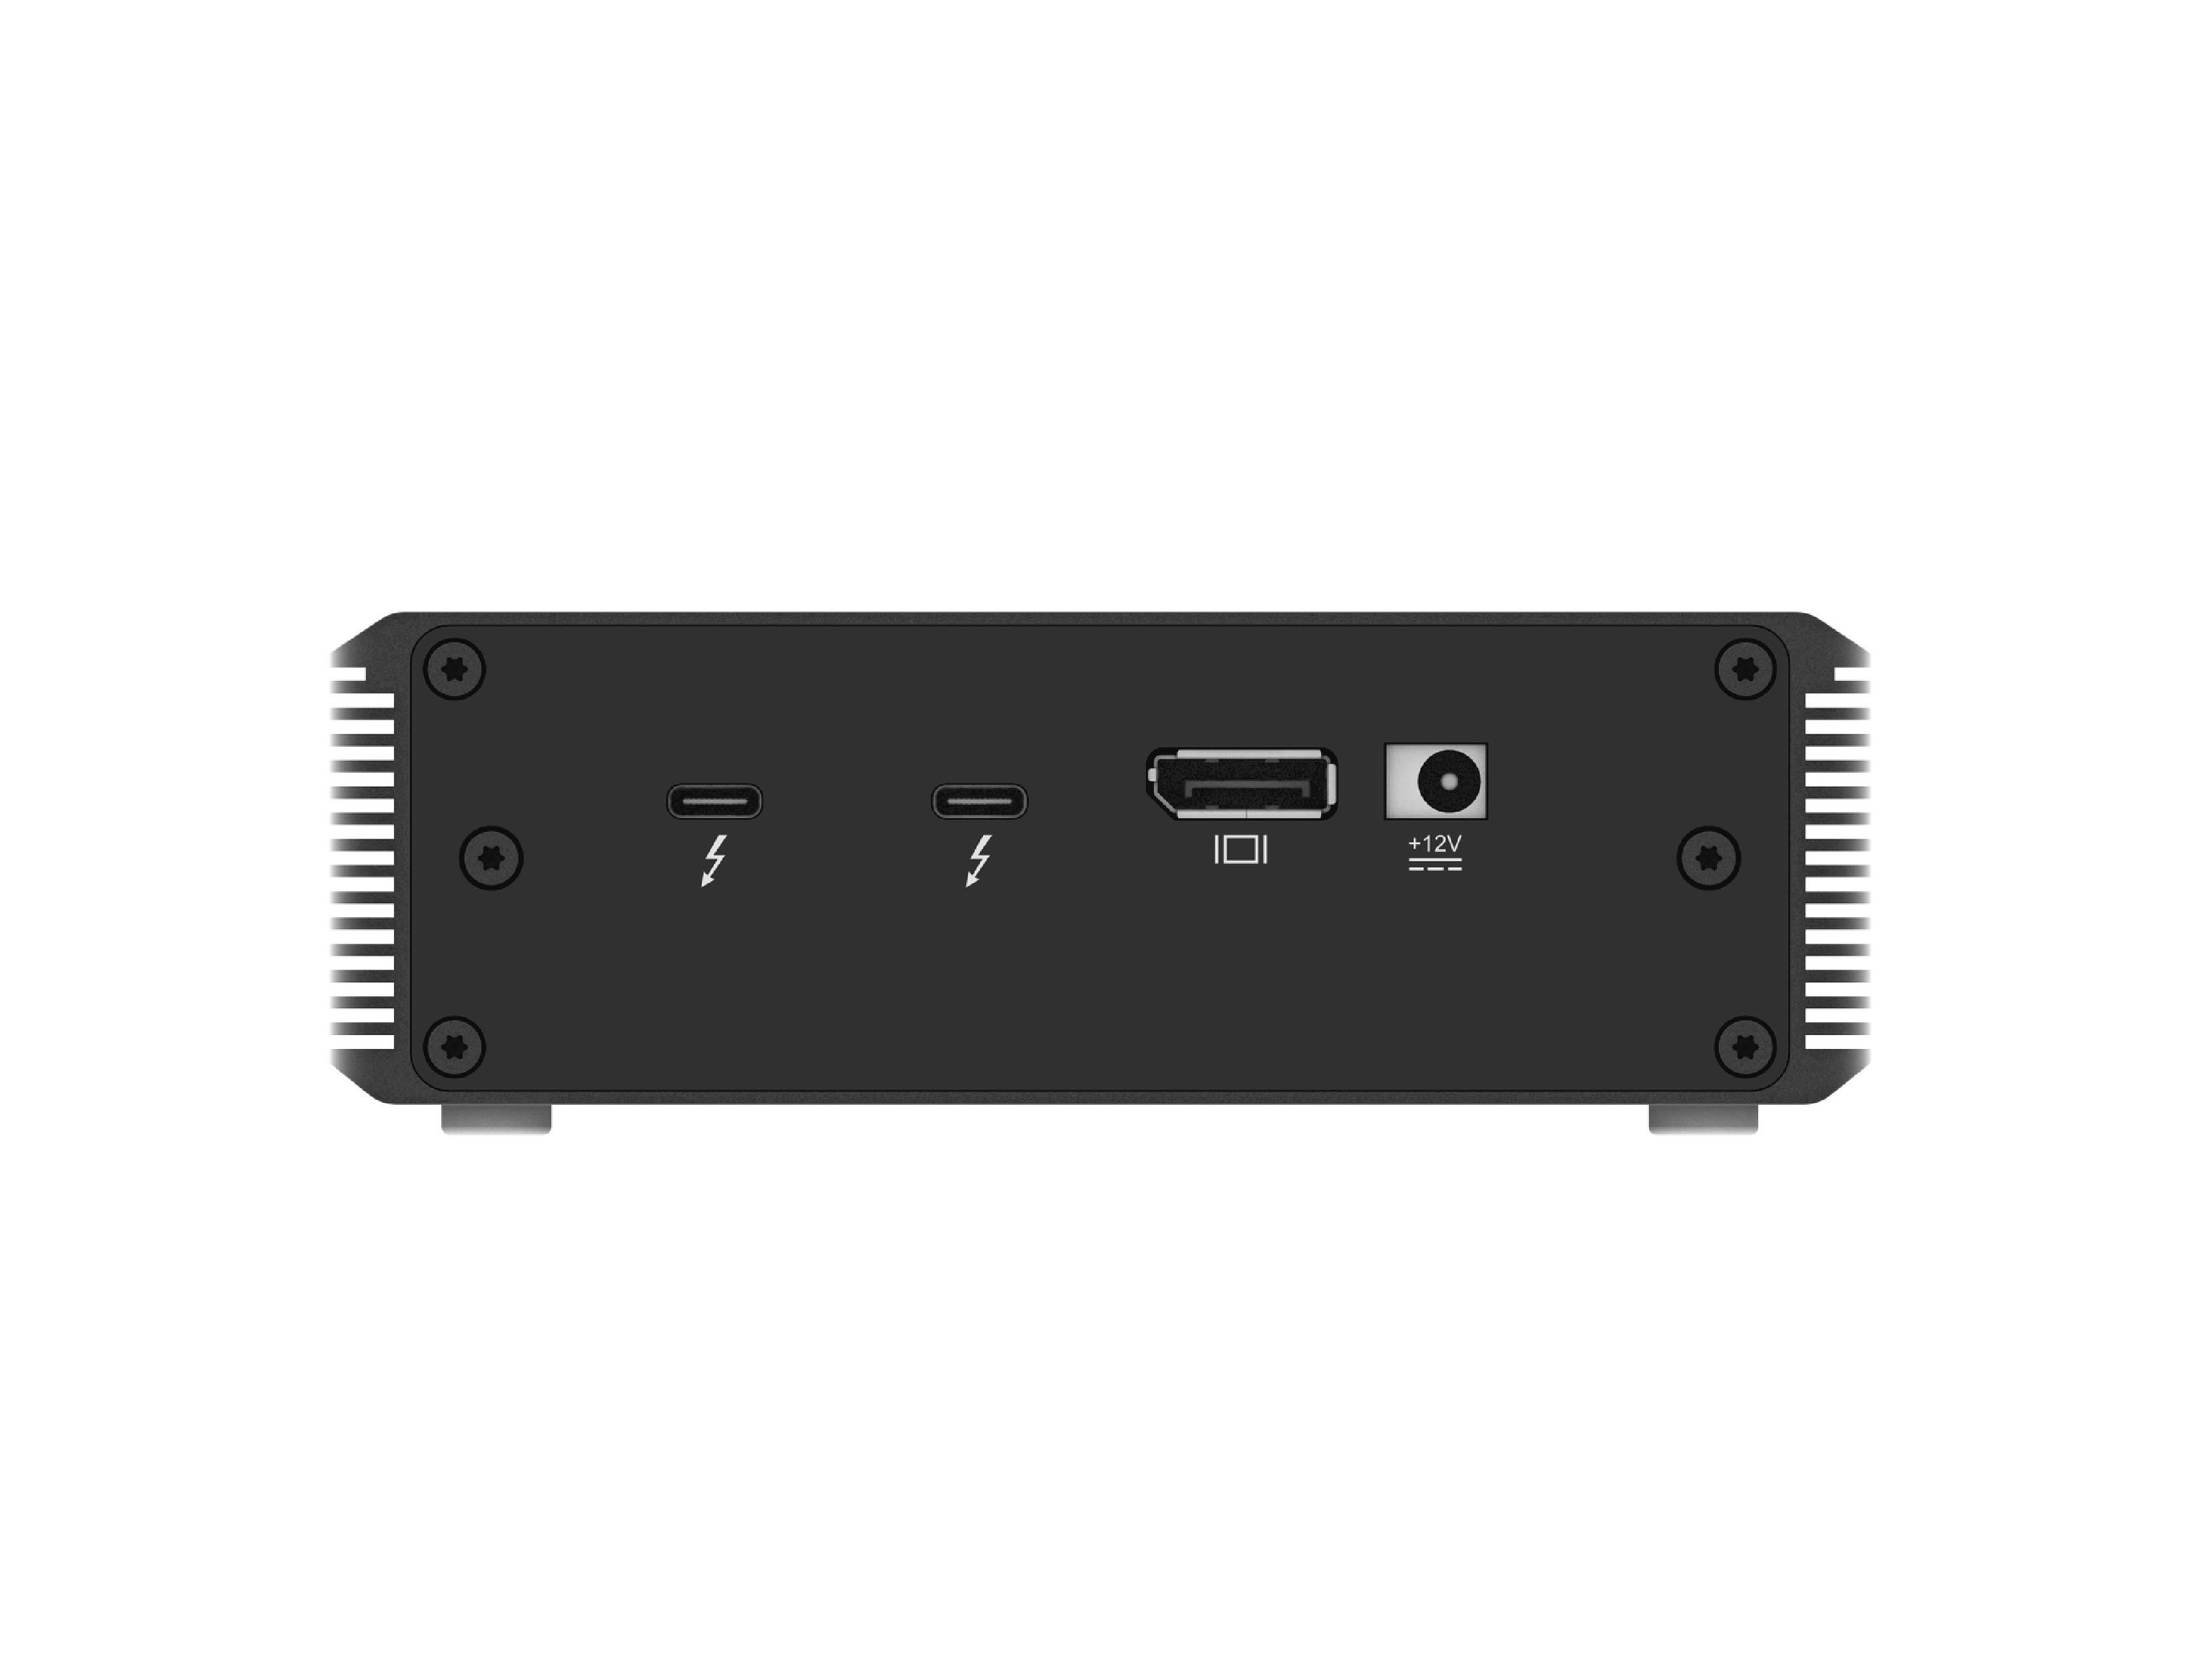 TBT3 2 Bay M.2 NVMe SSD Enclosure (SI-9224TB3), compatible with 2x M.2 NVMe PCIe SSD, 2x Thunderbolt™ 3 40Gbps to host, 1x DisplayPort1.2 4K@60Hz output.